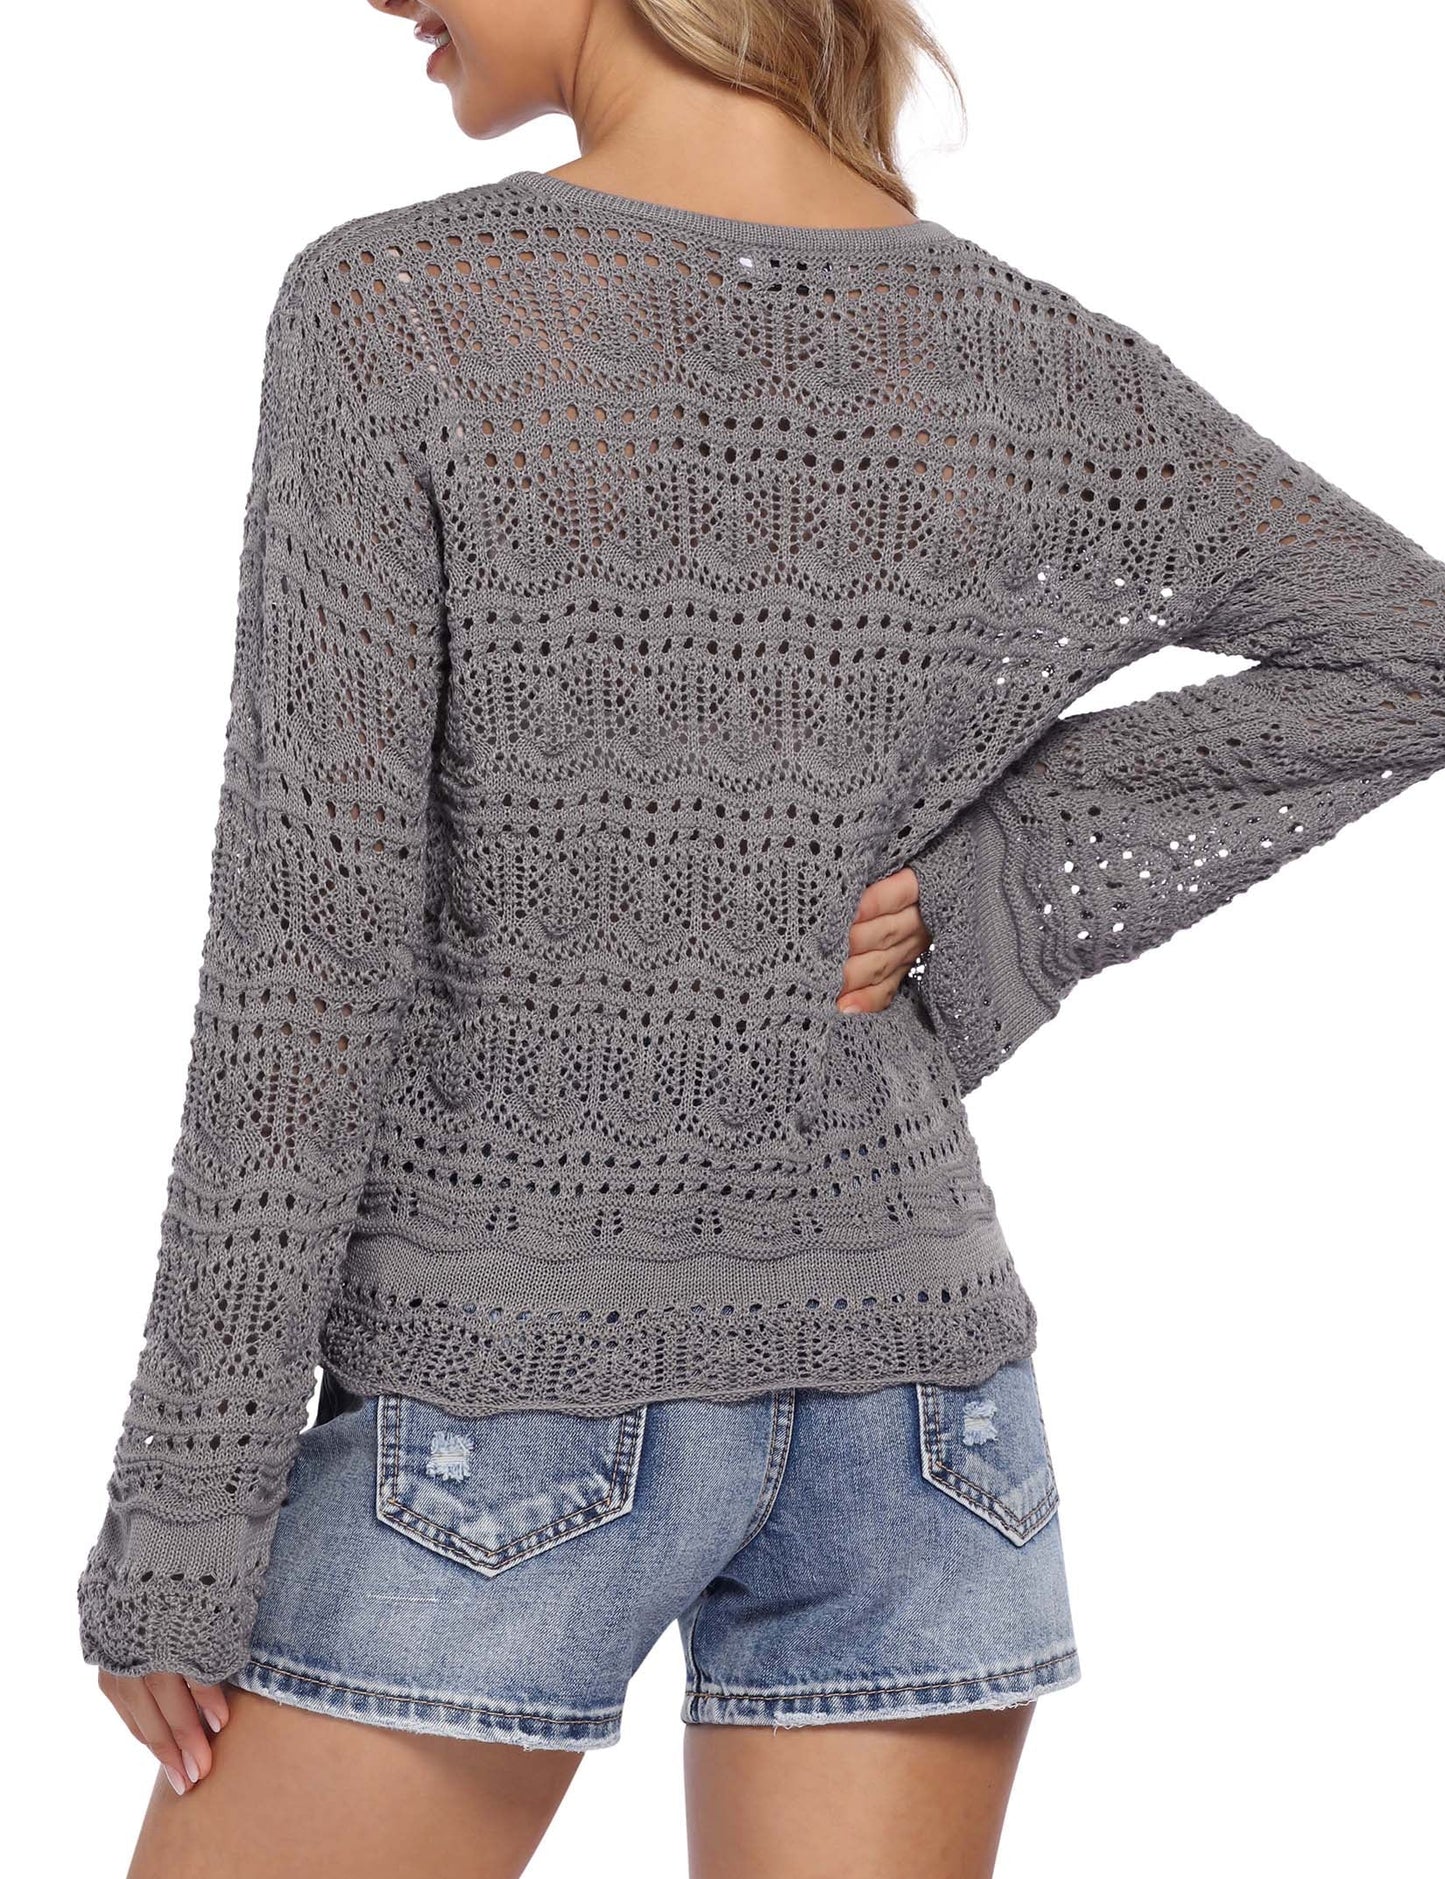 YESFASHION Drawstring Knitted Blouse Women Adjustable Crochet Tops Grey